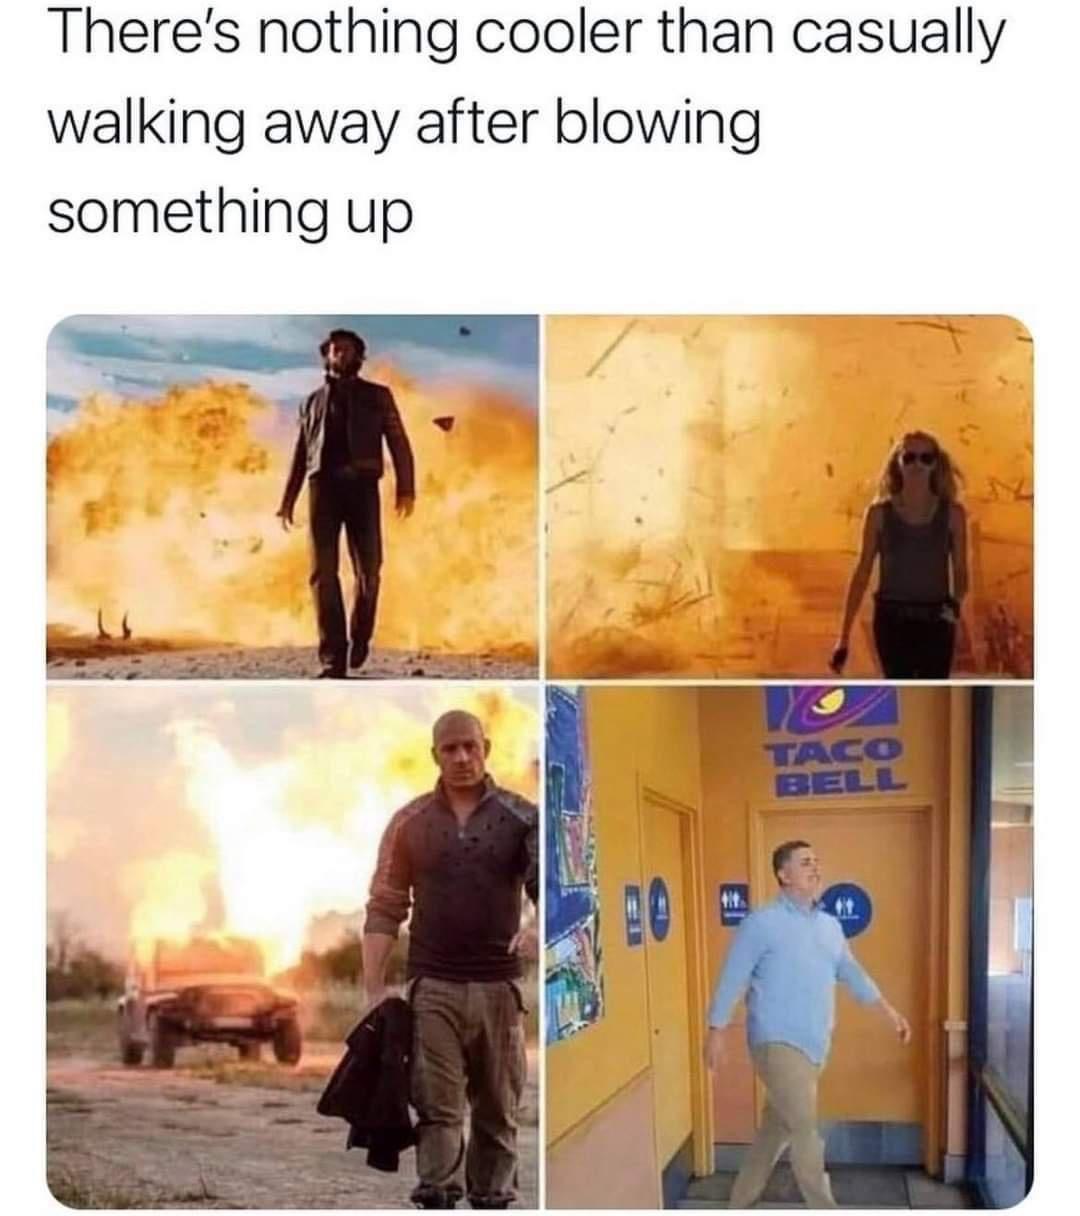 there’s nothing cooler than casually walking away after blowing something up, taco bell